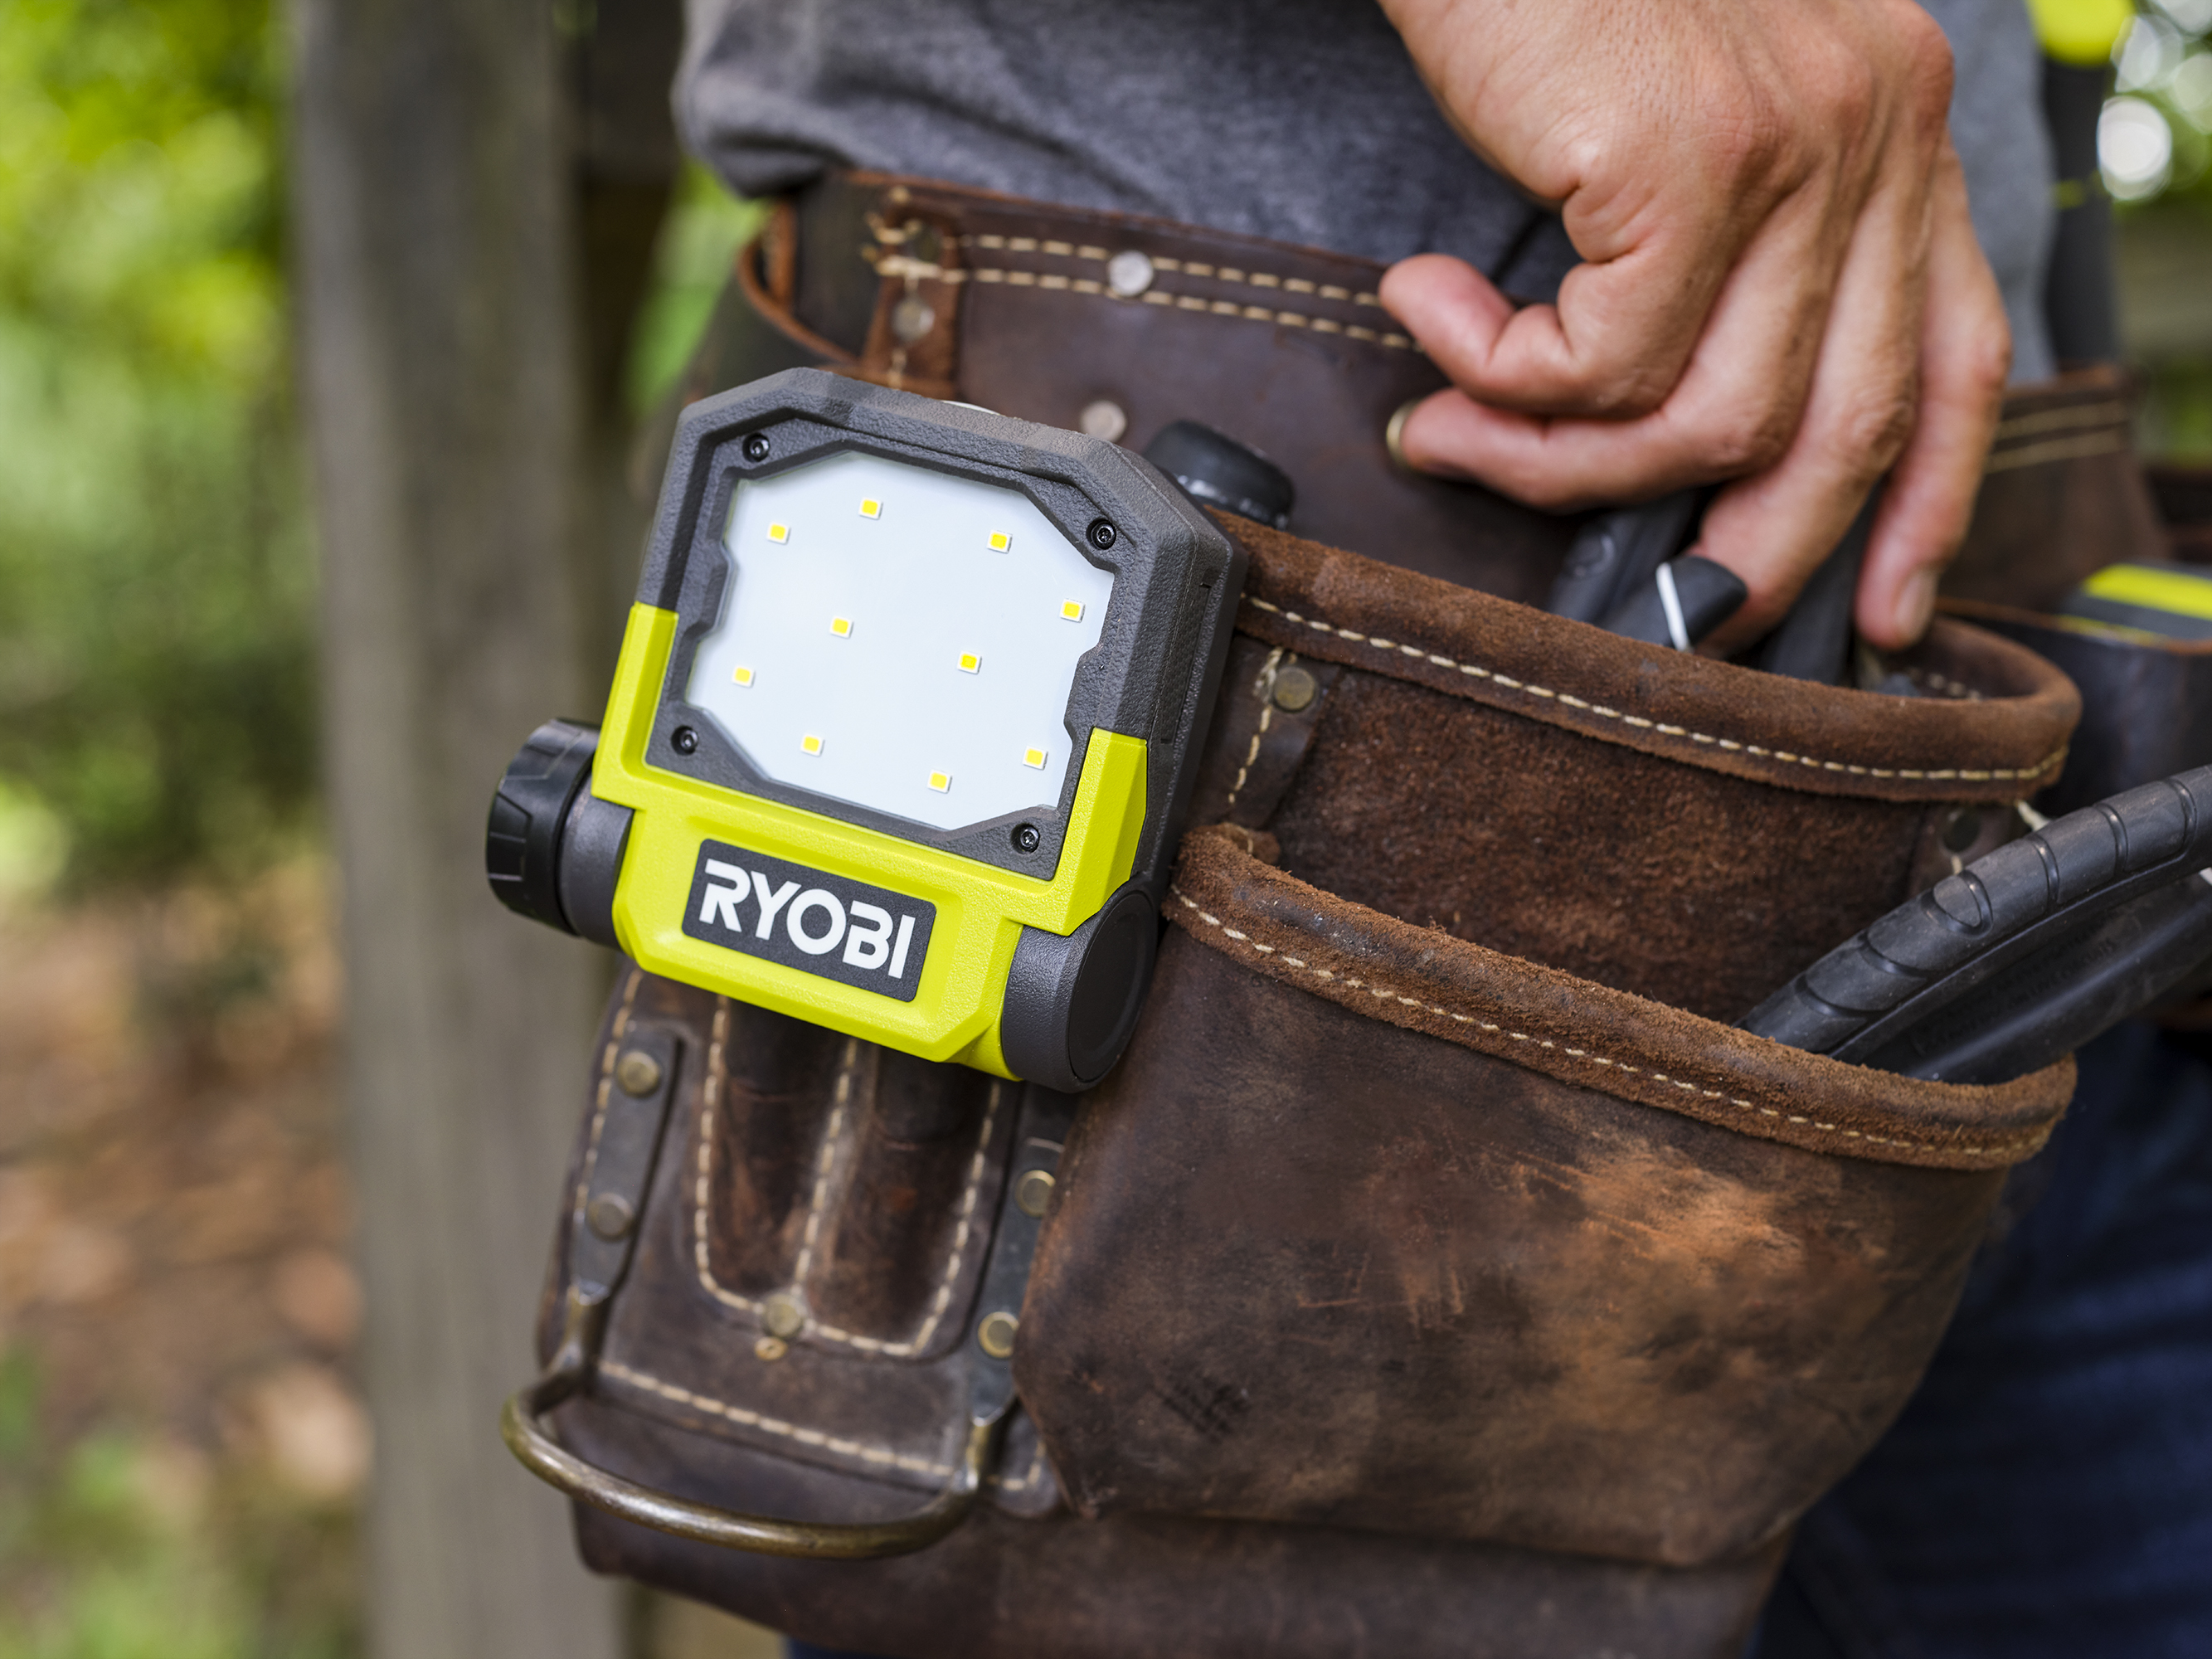 Powered by the RYOBI USB Lithium Battery System 